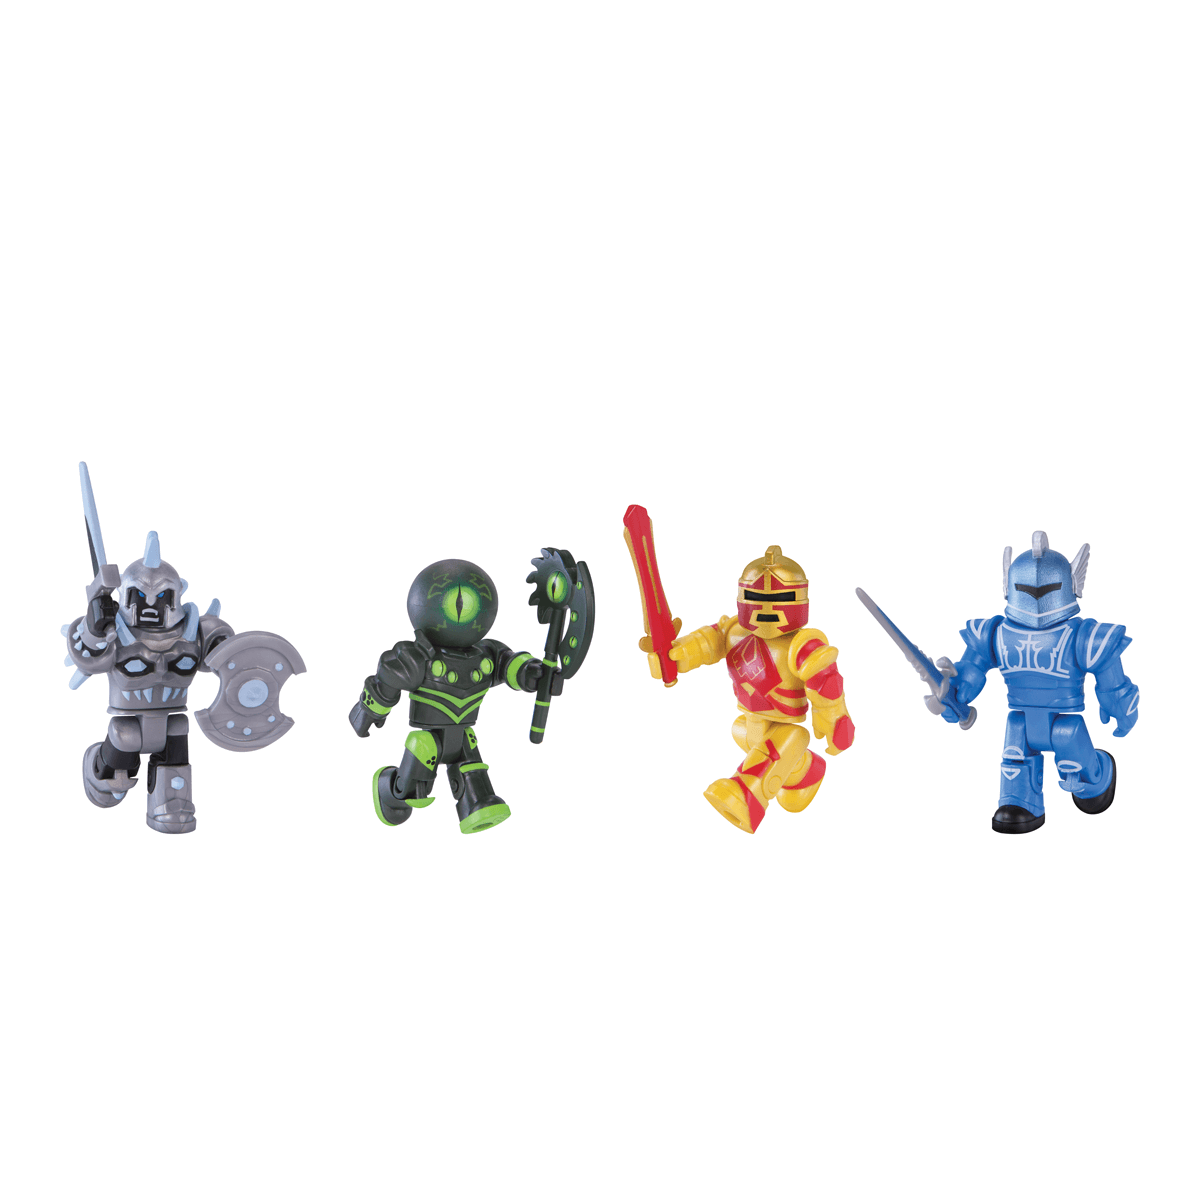 Roblox Champions Of Roblox 4 Pack The Entertainer - details about champions of roblox action figure 6 pack